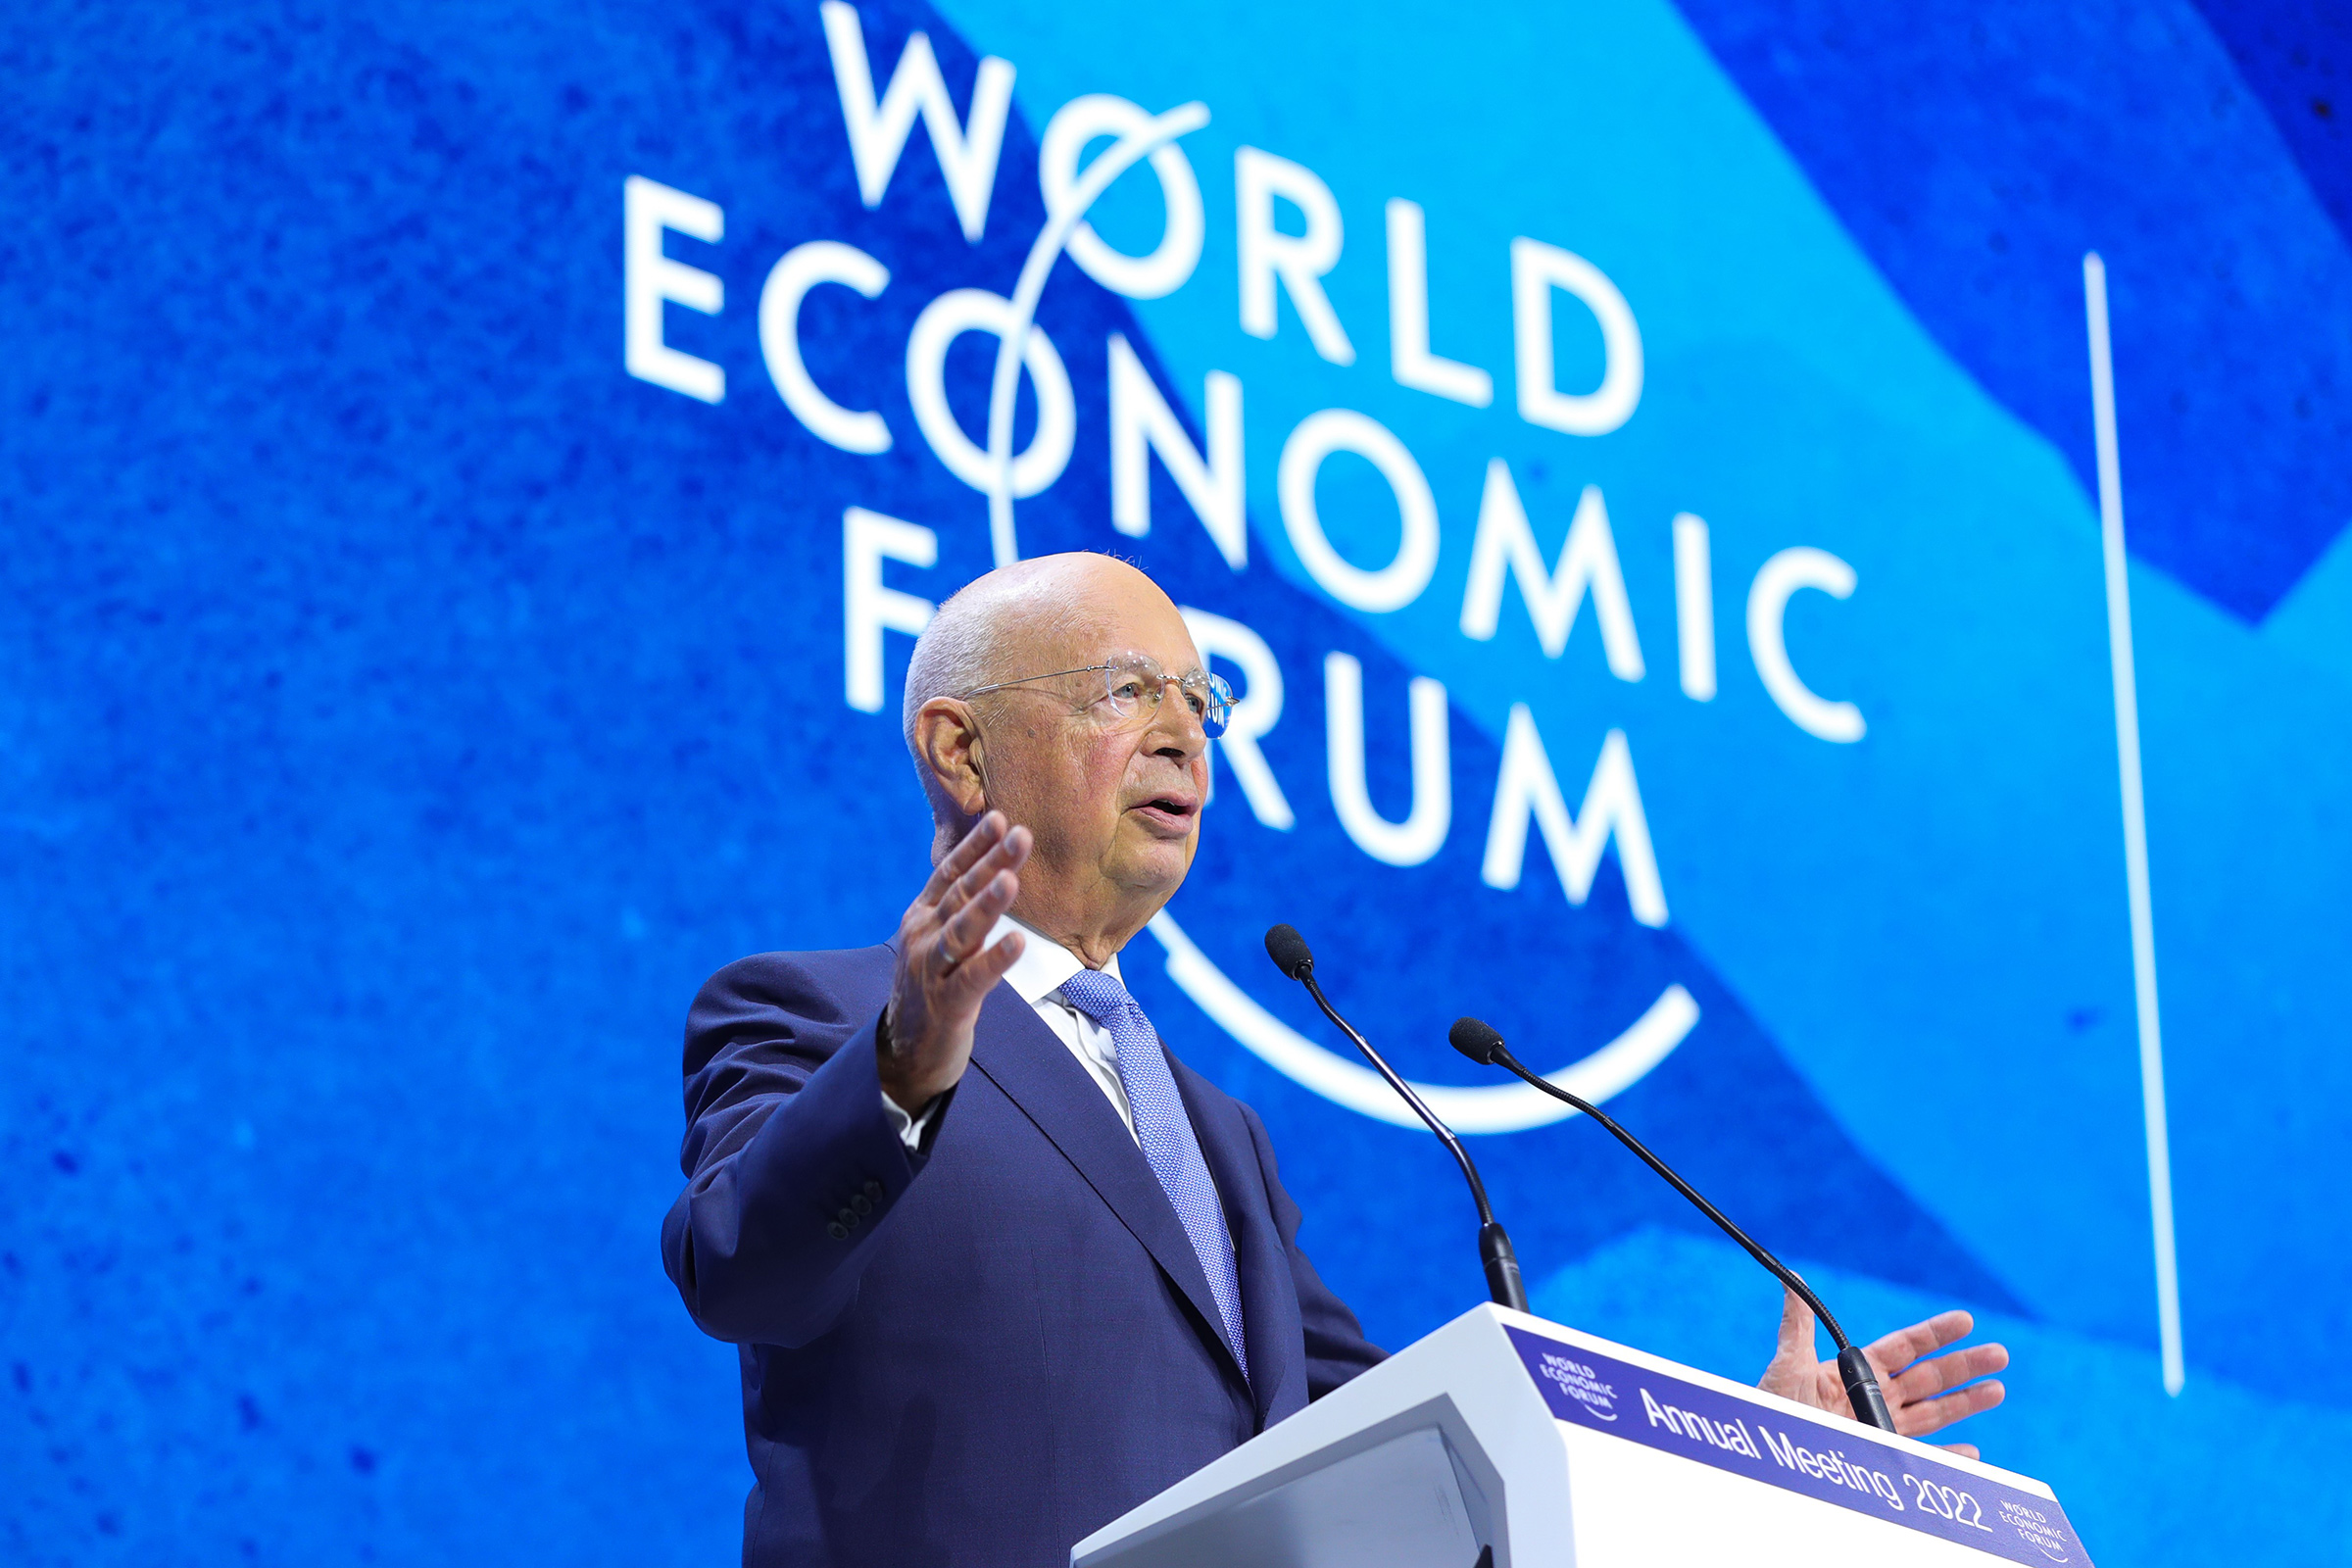 Founder and executive chairman of the World Economic Forum Klaus Schwab delivers a speech at the WEF 2022 Annual Meeting in Davos, Switzerland, May 23, 2022. (Zheng Huansong—Xinhua/Getty Images)